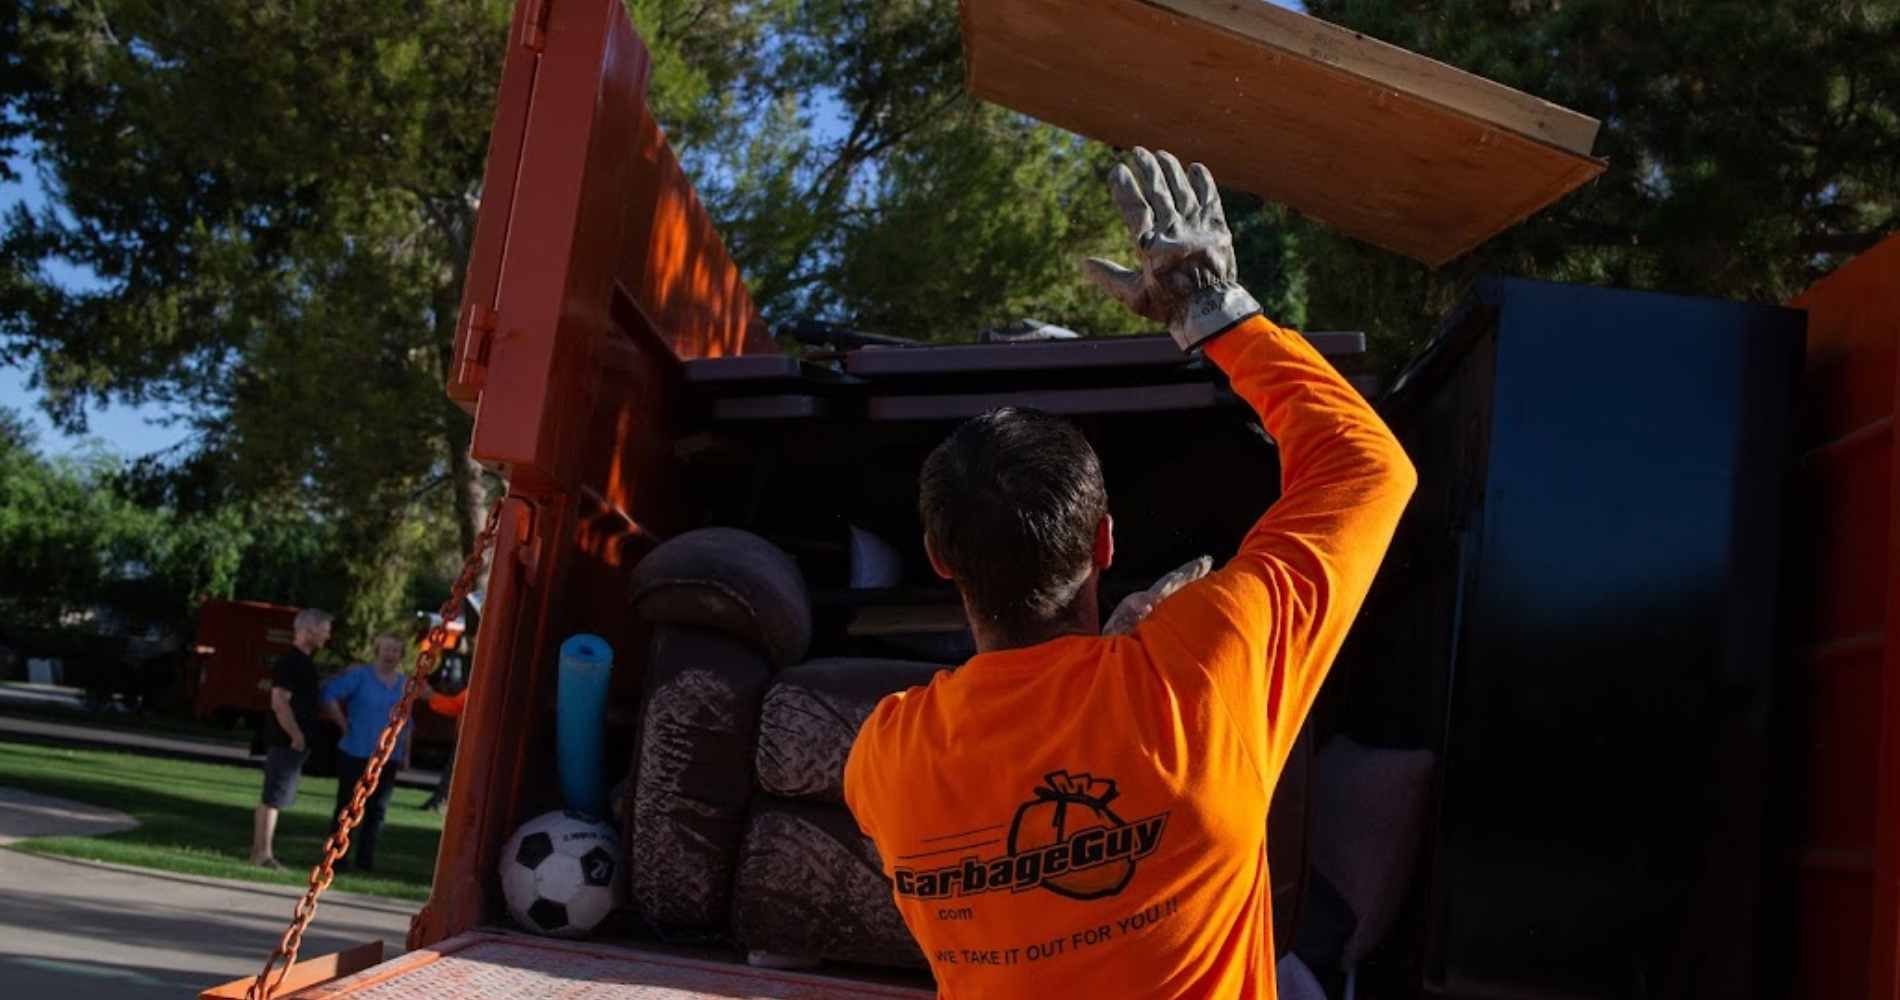 #1 for Eviction Cleanout in Surprise, AZ with Over 1200 5-Star Reviews!